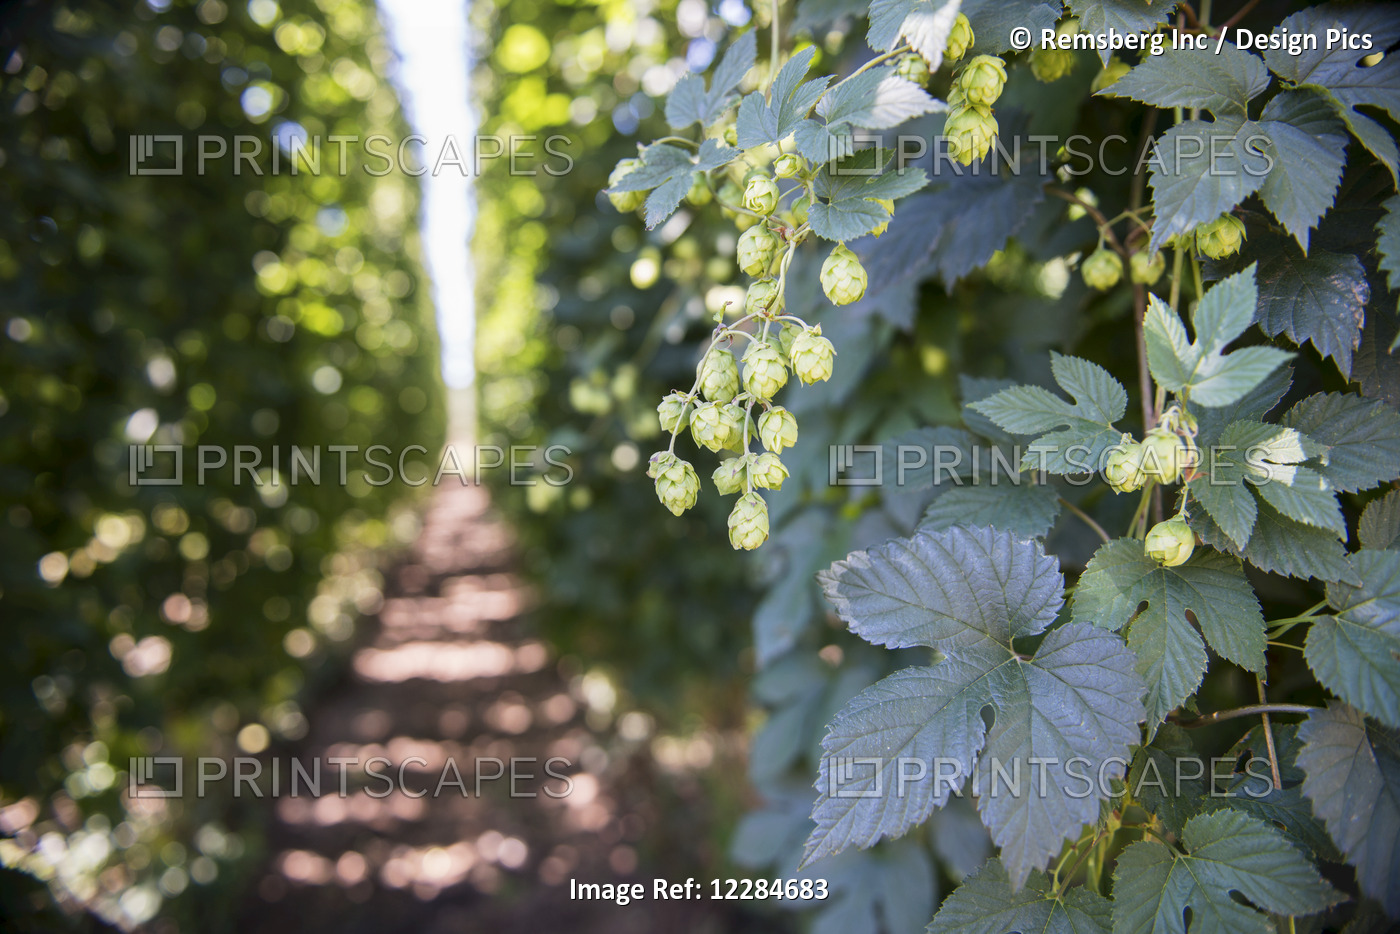 Production Of Hops (Humulus Lupulus) For Beer Brewing; George, Western Cape, ...